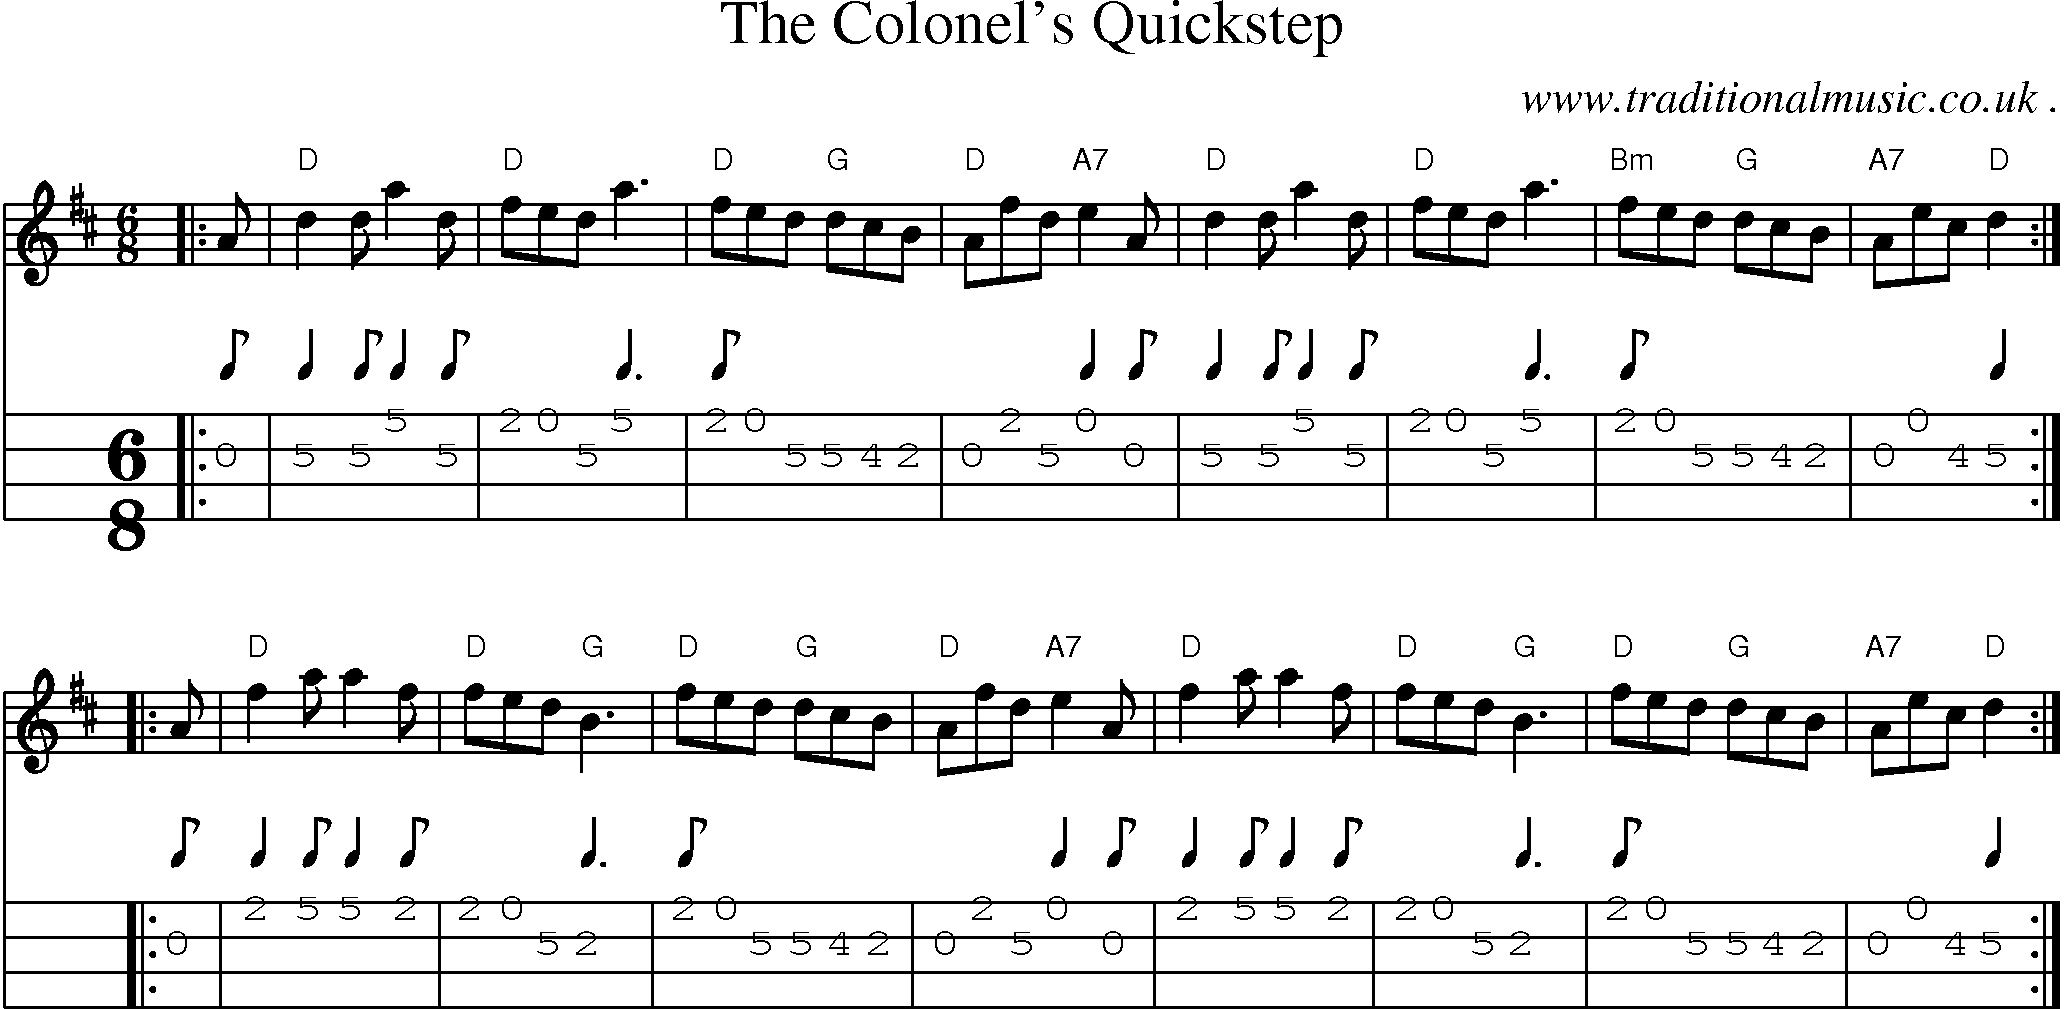 Sheet-music  score, Chords and Mandolin Tabs for The Colonels Quickstep